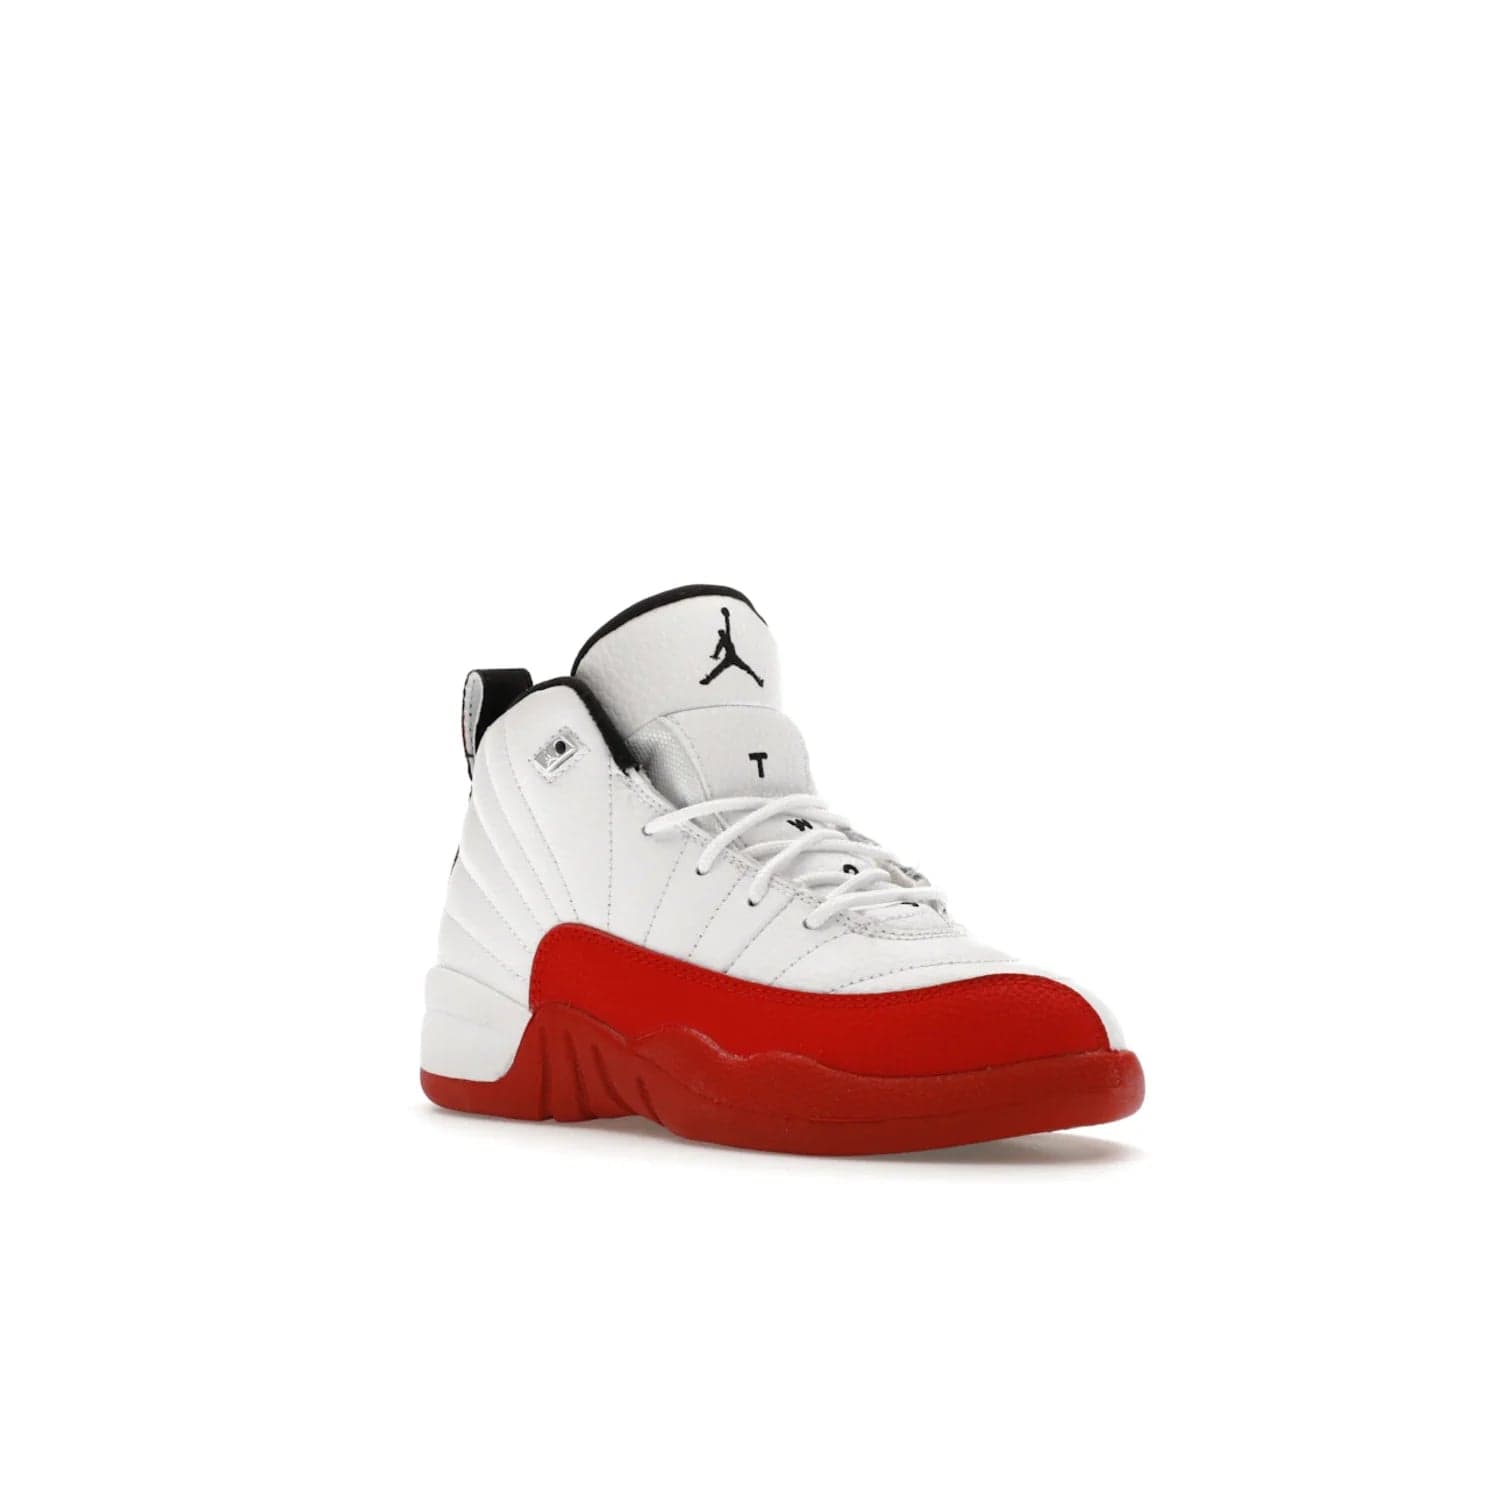 Jordan 12 Retro Cherry (2023) (PS) - Image 5 - Only at www.BallersClubKickz.com - Jordan 12 Retro Cherry dropping for toddlers in 2023! White leather upper with black overlays and red branding. Classic court style for your little one.